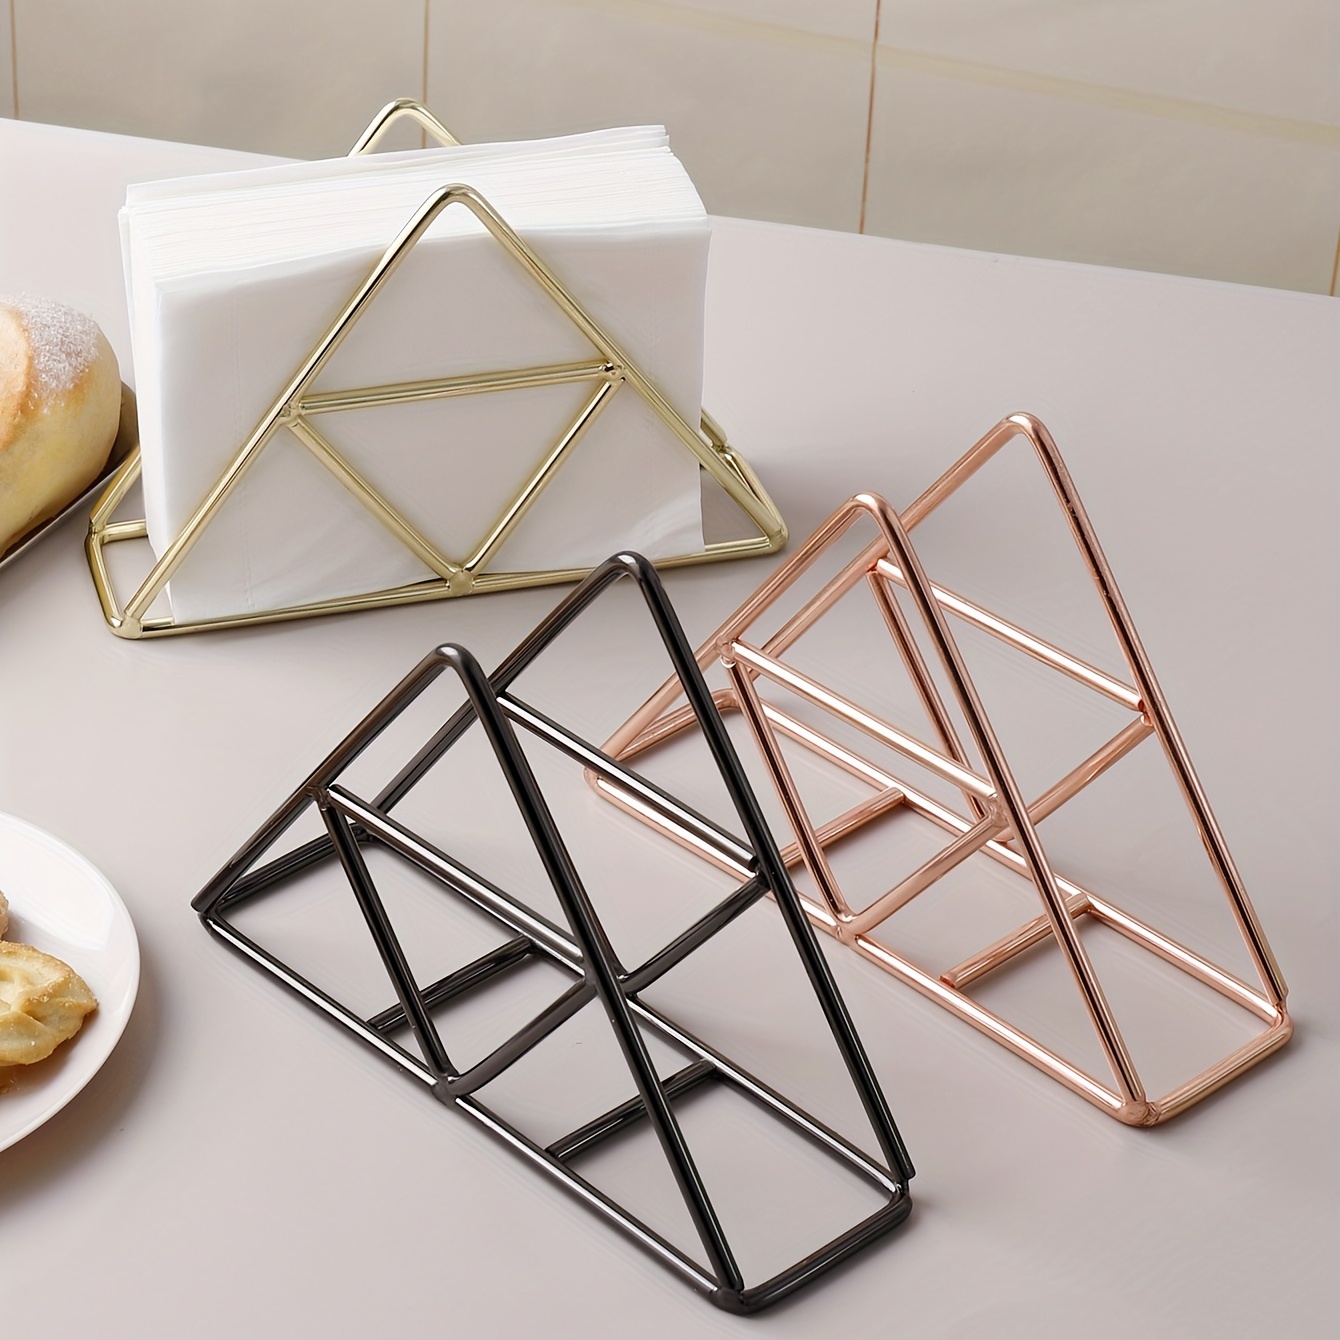 

1pc Modern Metal Napkin Holder For Bathroom And Kitchen - Stylish Tissue Holder For Table Accessories